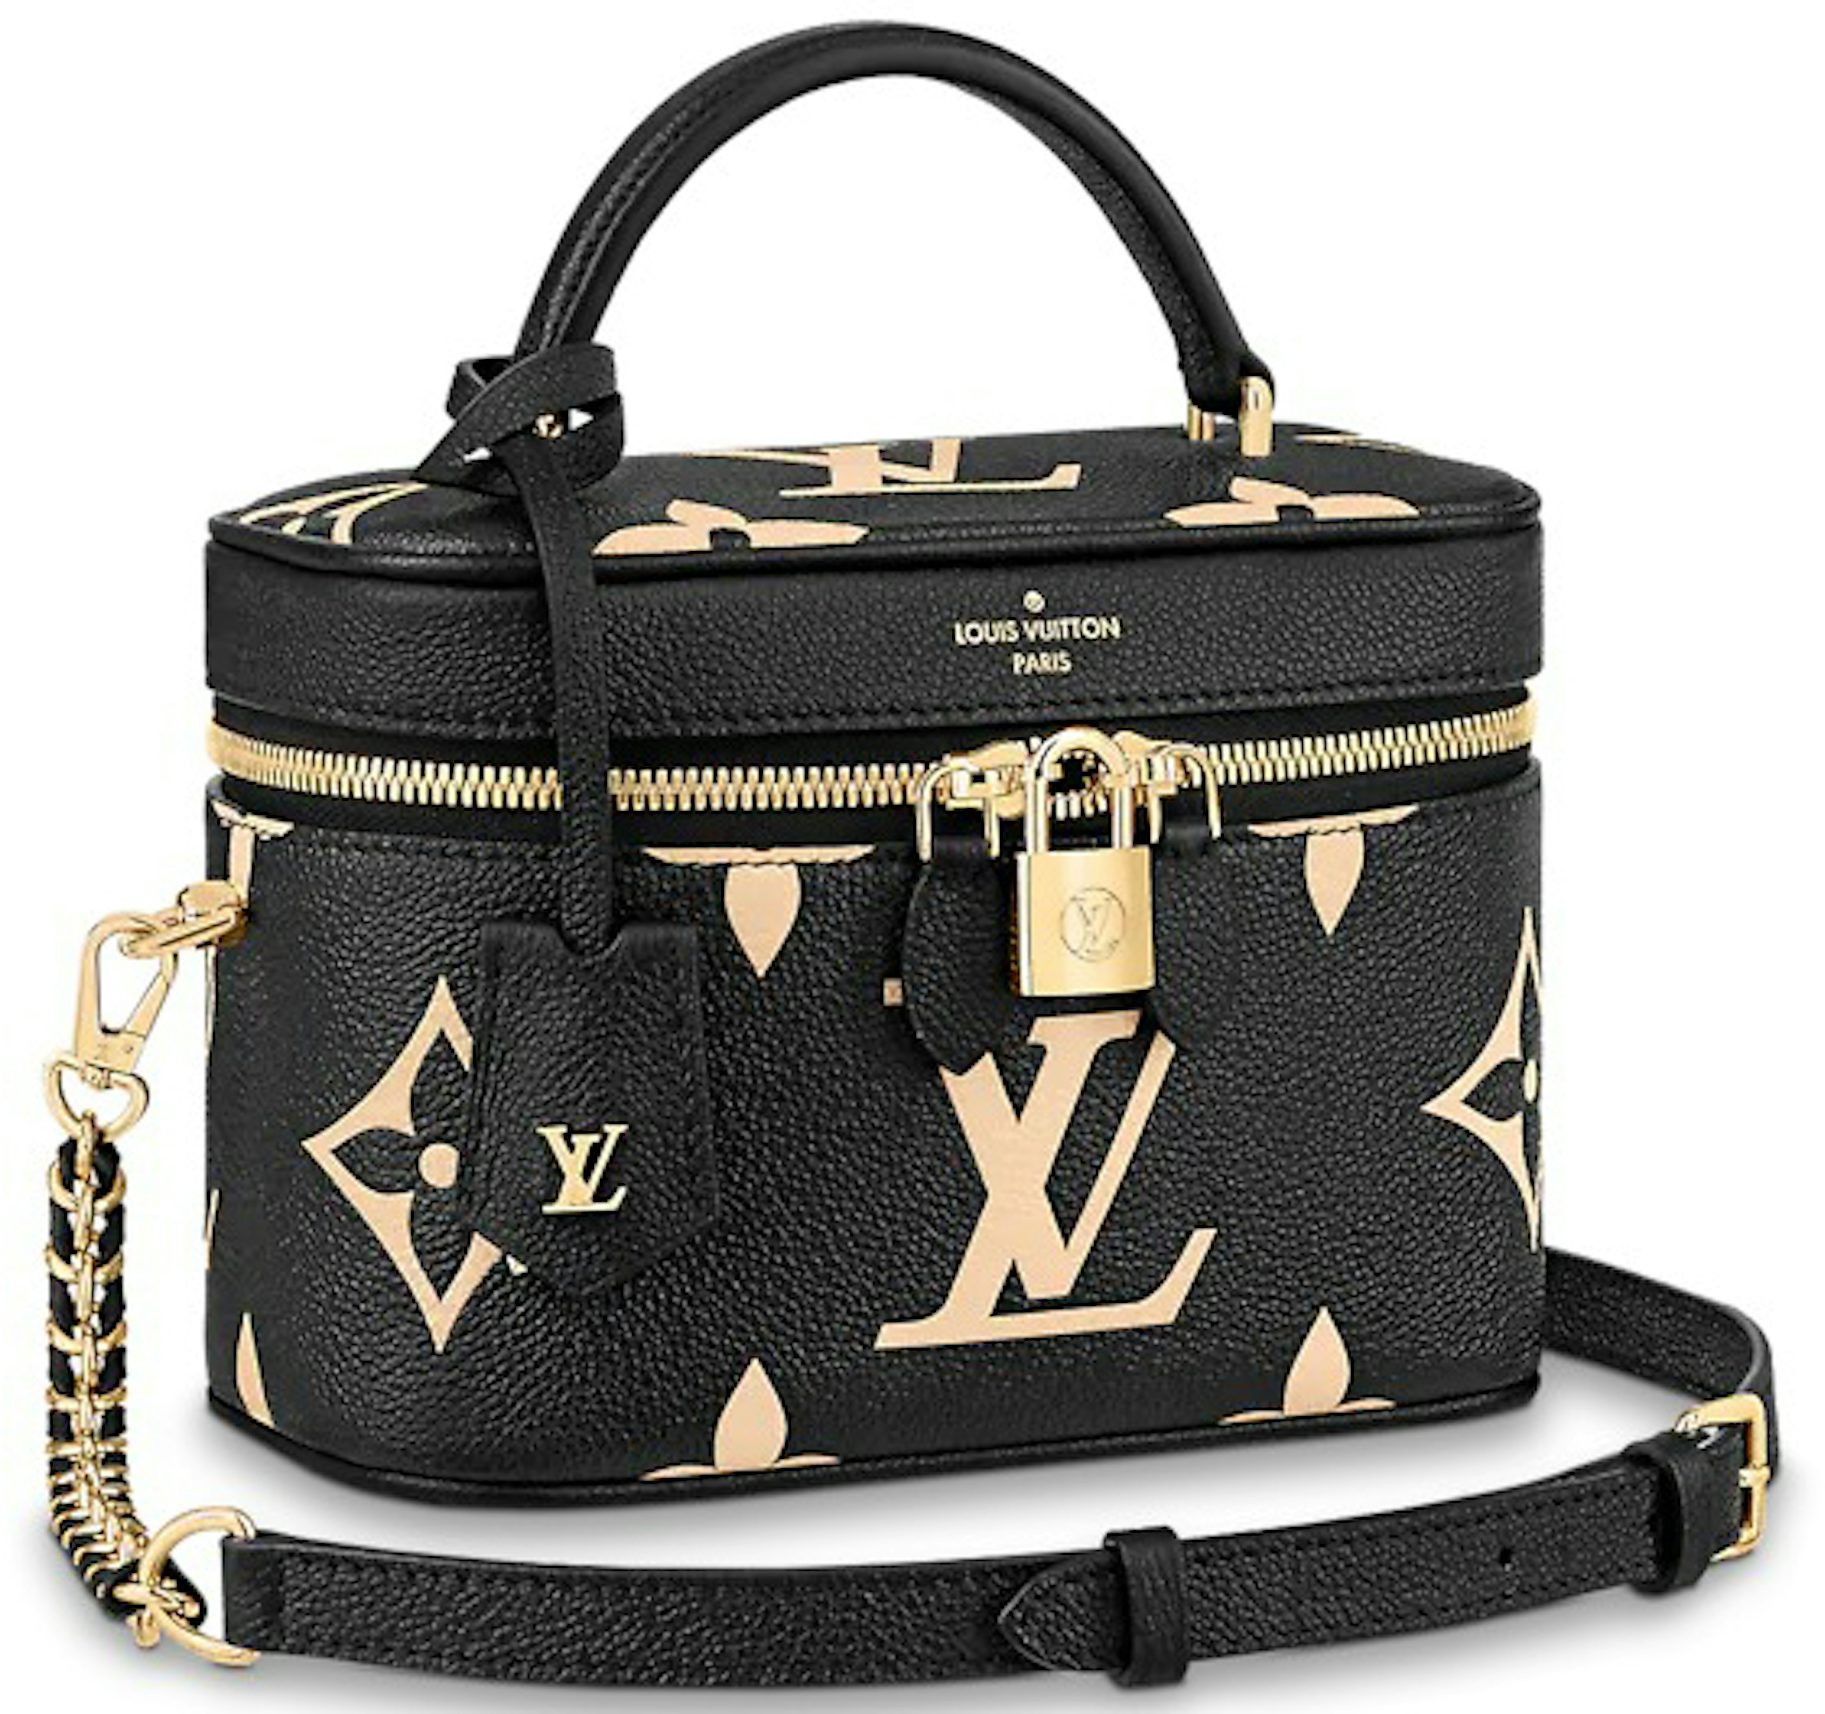 We have 2 Louis Vuitton Vanity PM currently in stock!